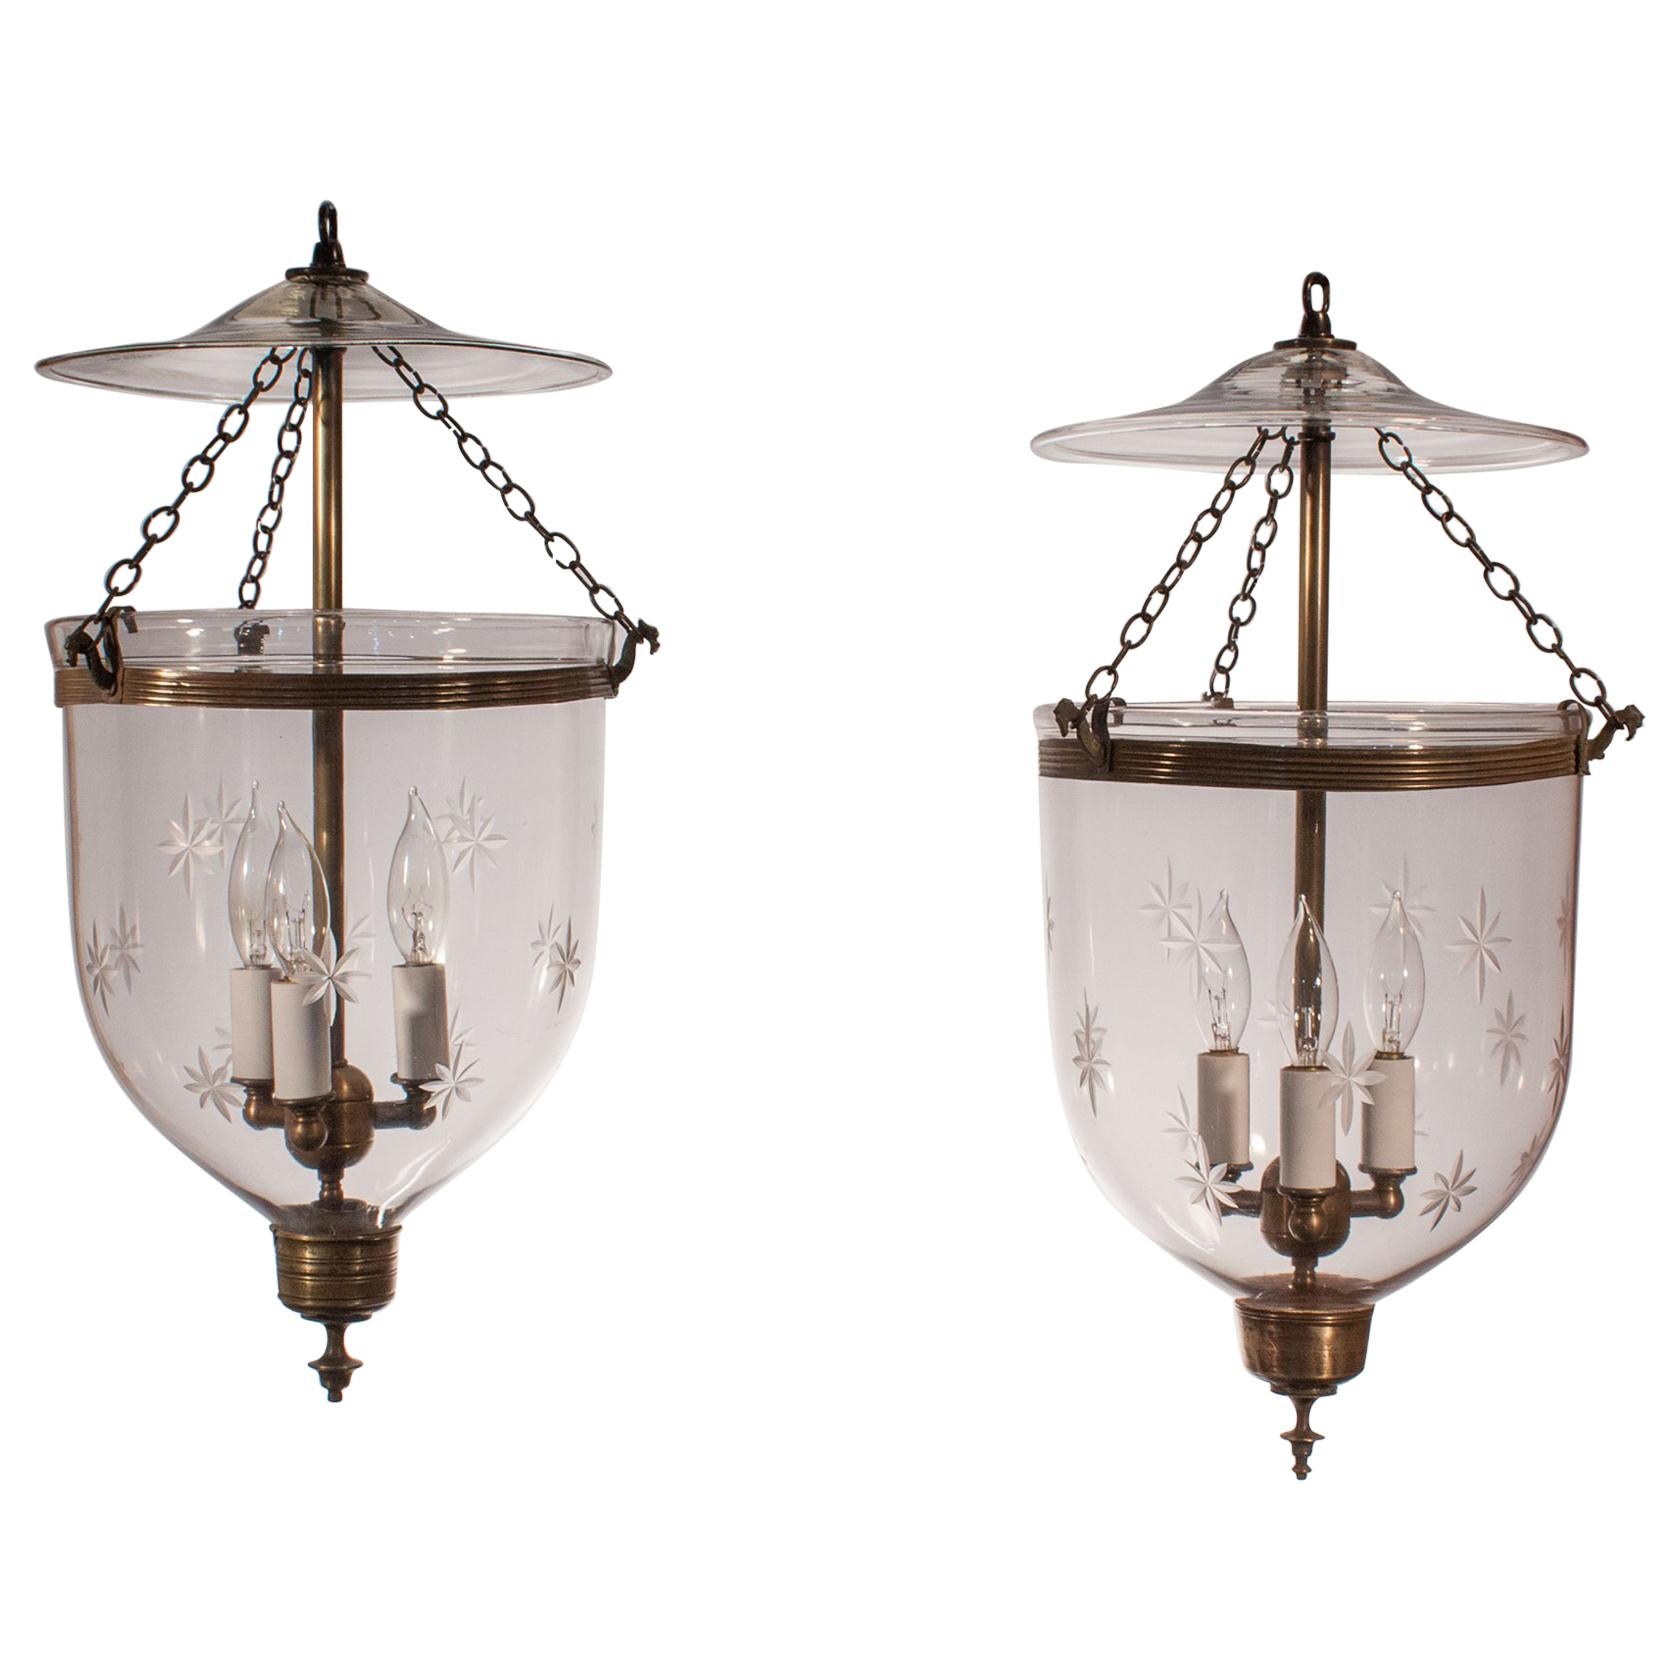  Pair of Bell Jar Lanterns with Etched Stars